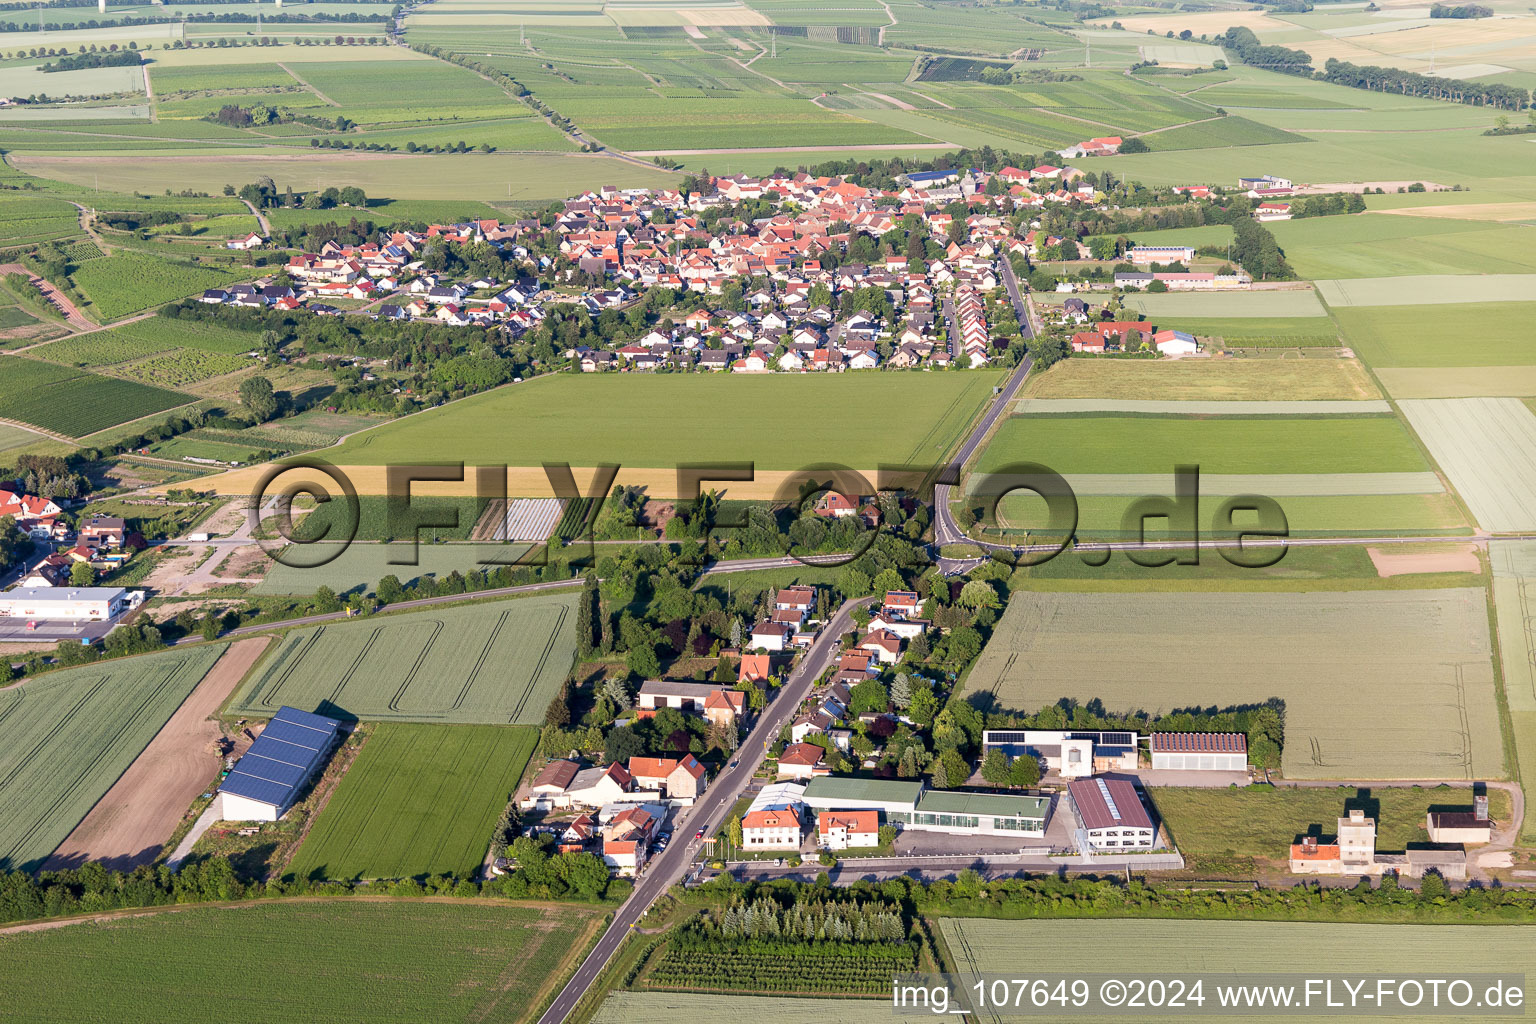 Agricultural land and field borders surround the settlement area of the village in Dorn-Duerkheim in the state Rhineland-Palatinate, Germany